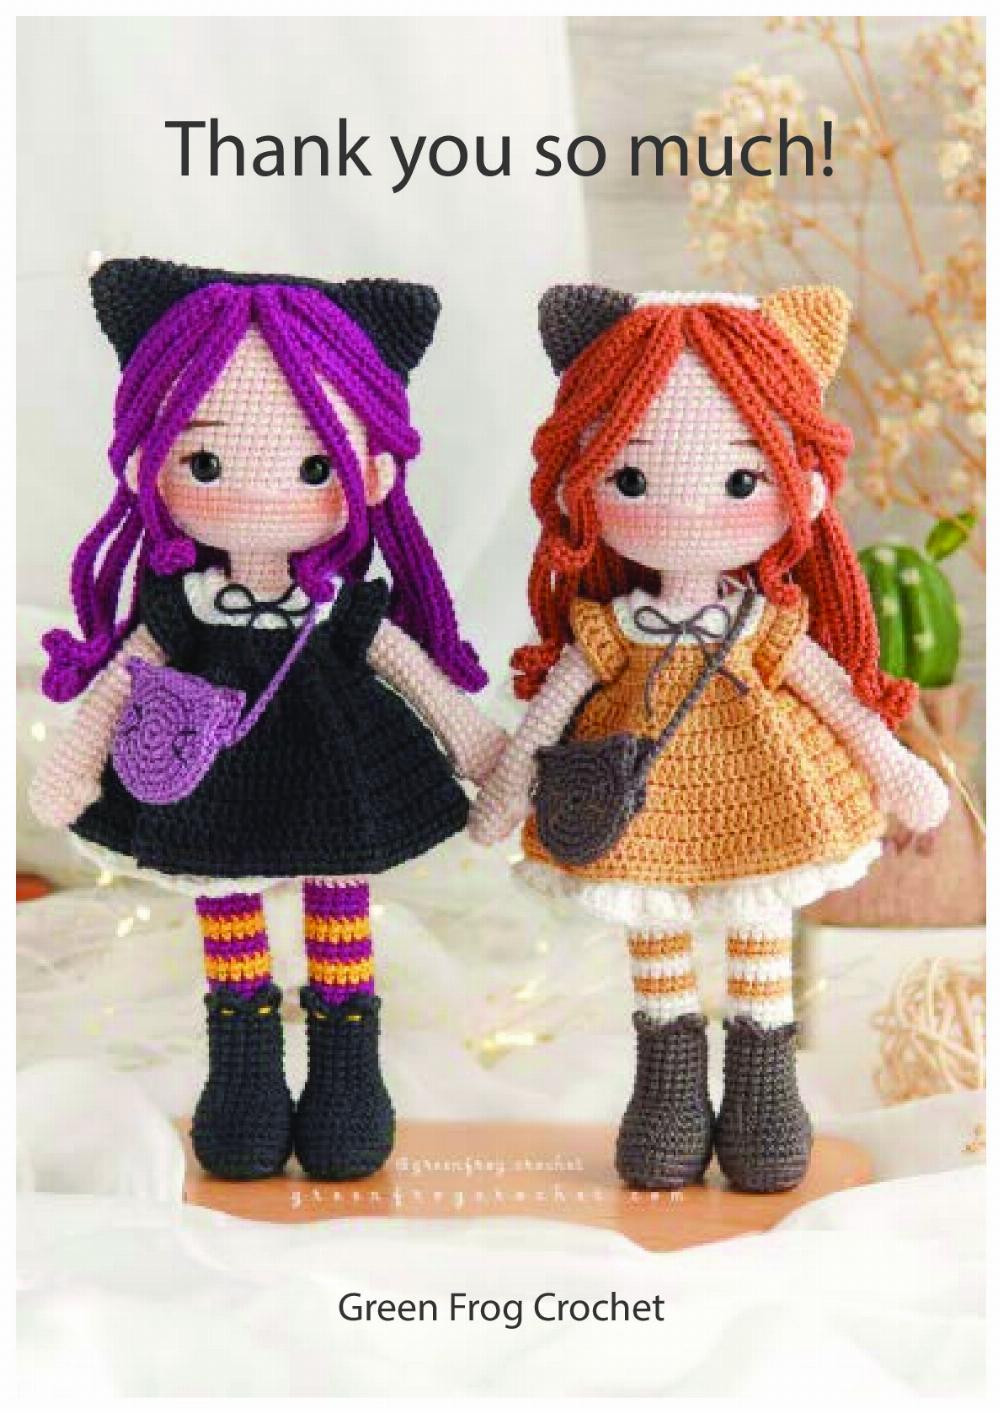 Doll Katy,  Girl crochet model wearing orange and black clothes, orange and black hair, carrying a crossbody bag and cat ears